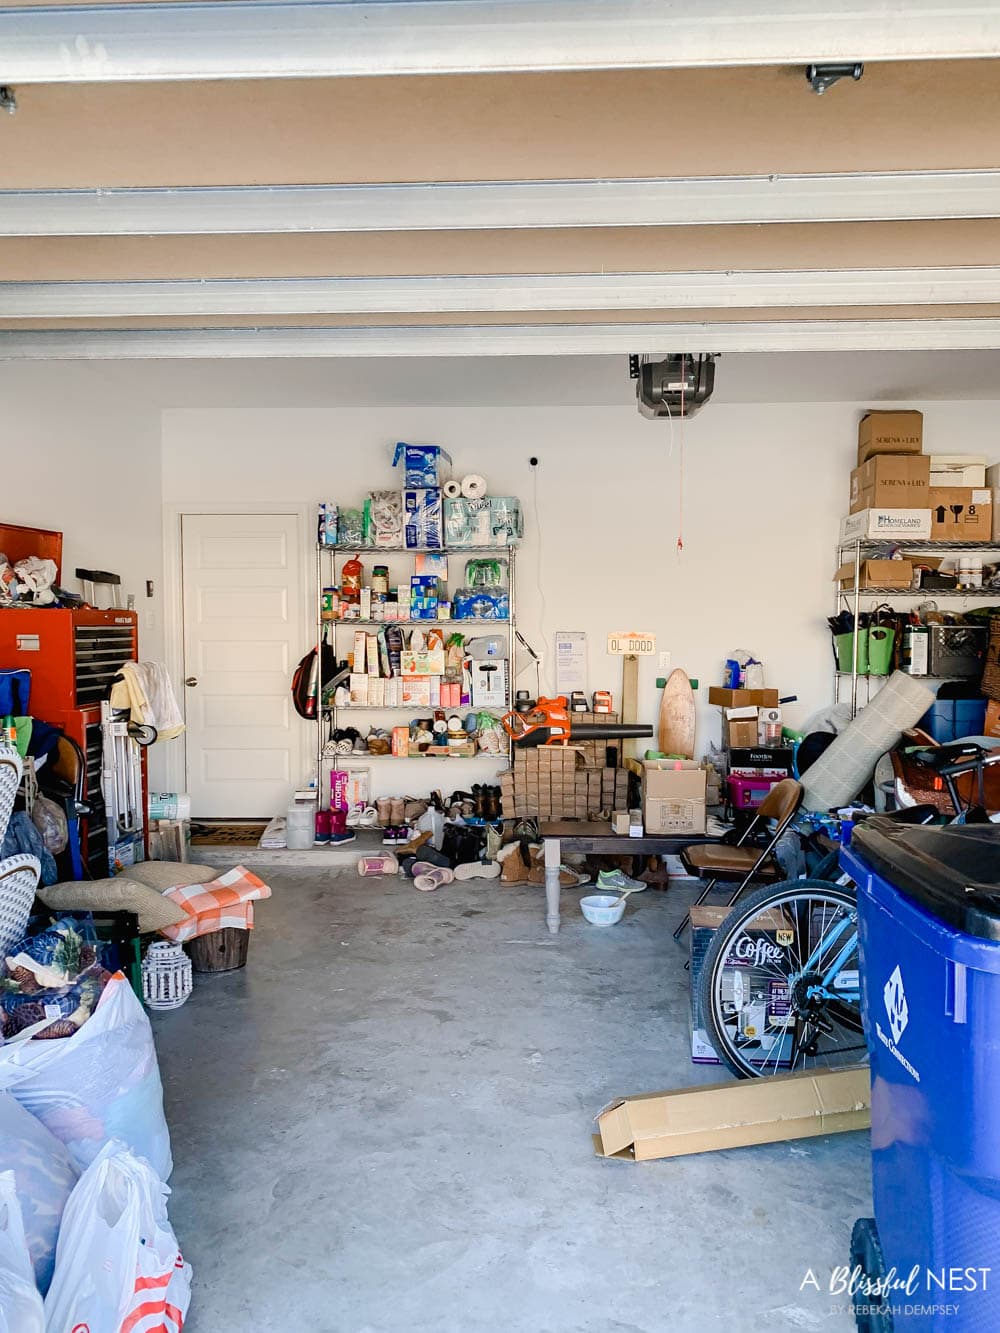 Top on my list to organize for the new year is our garage. #ABlissfulNest #garageorganization